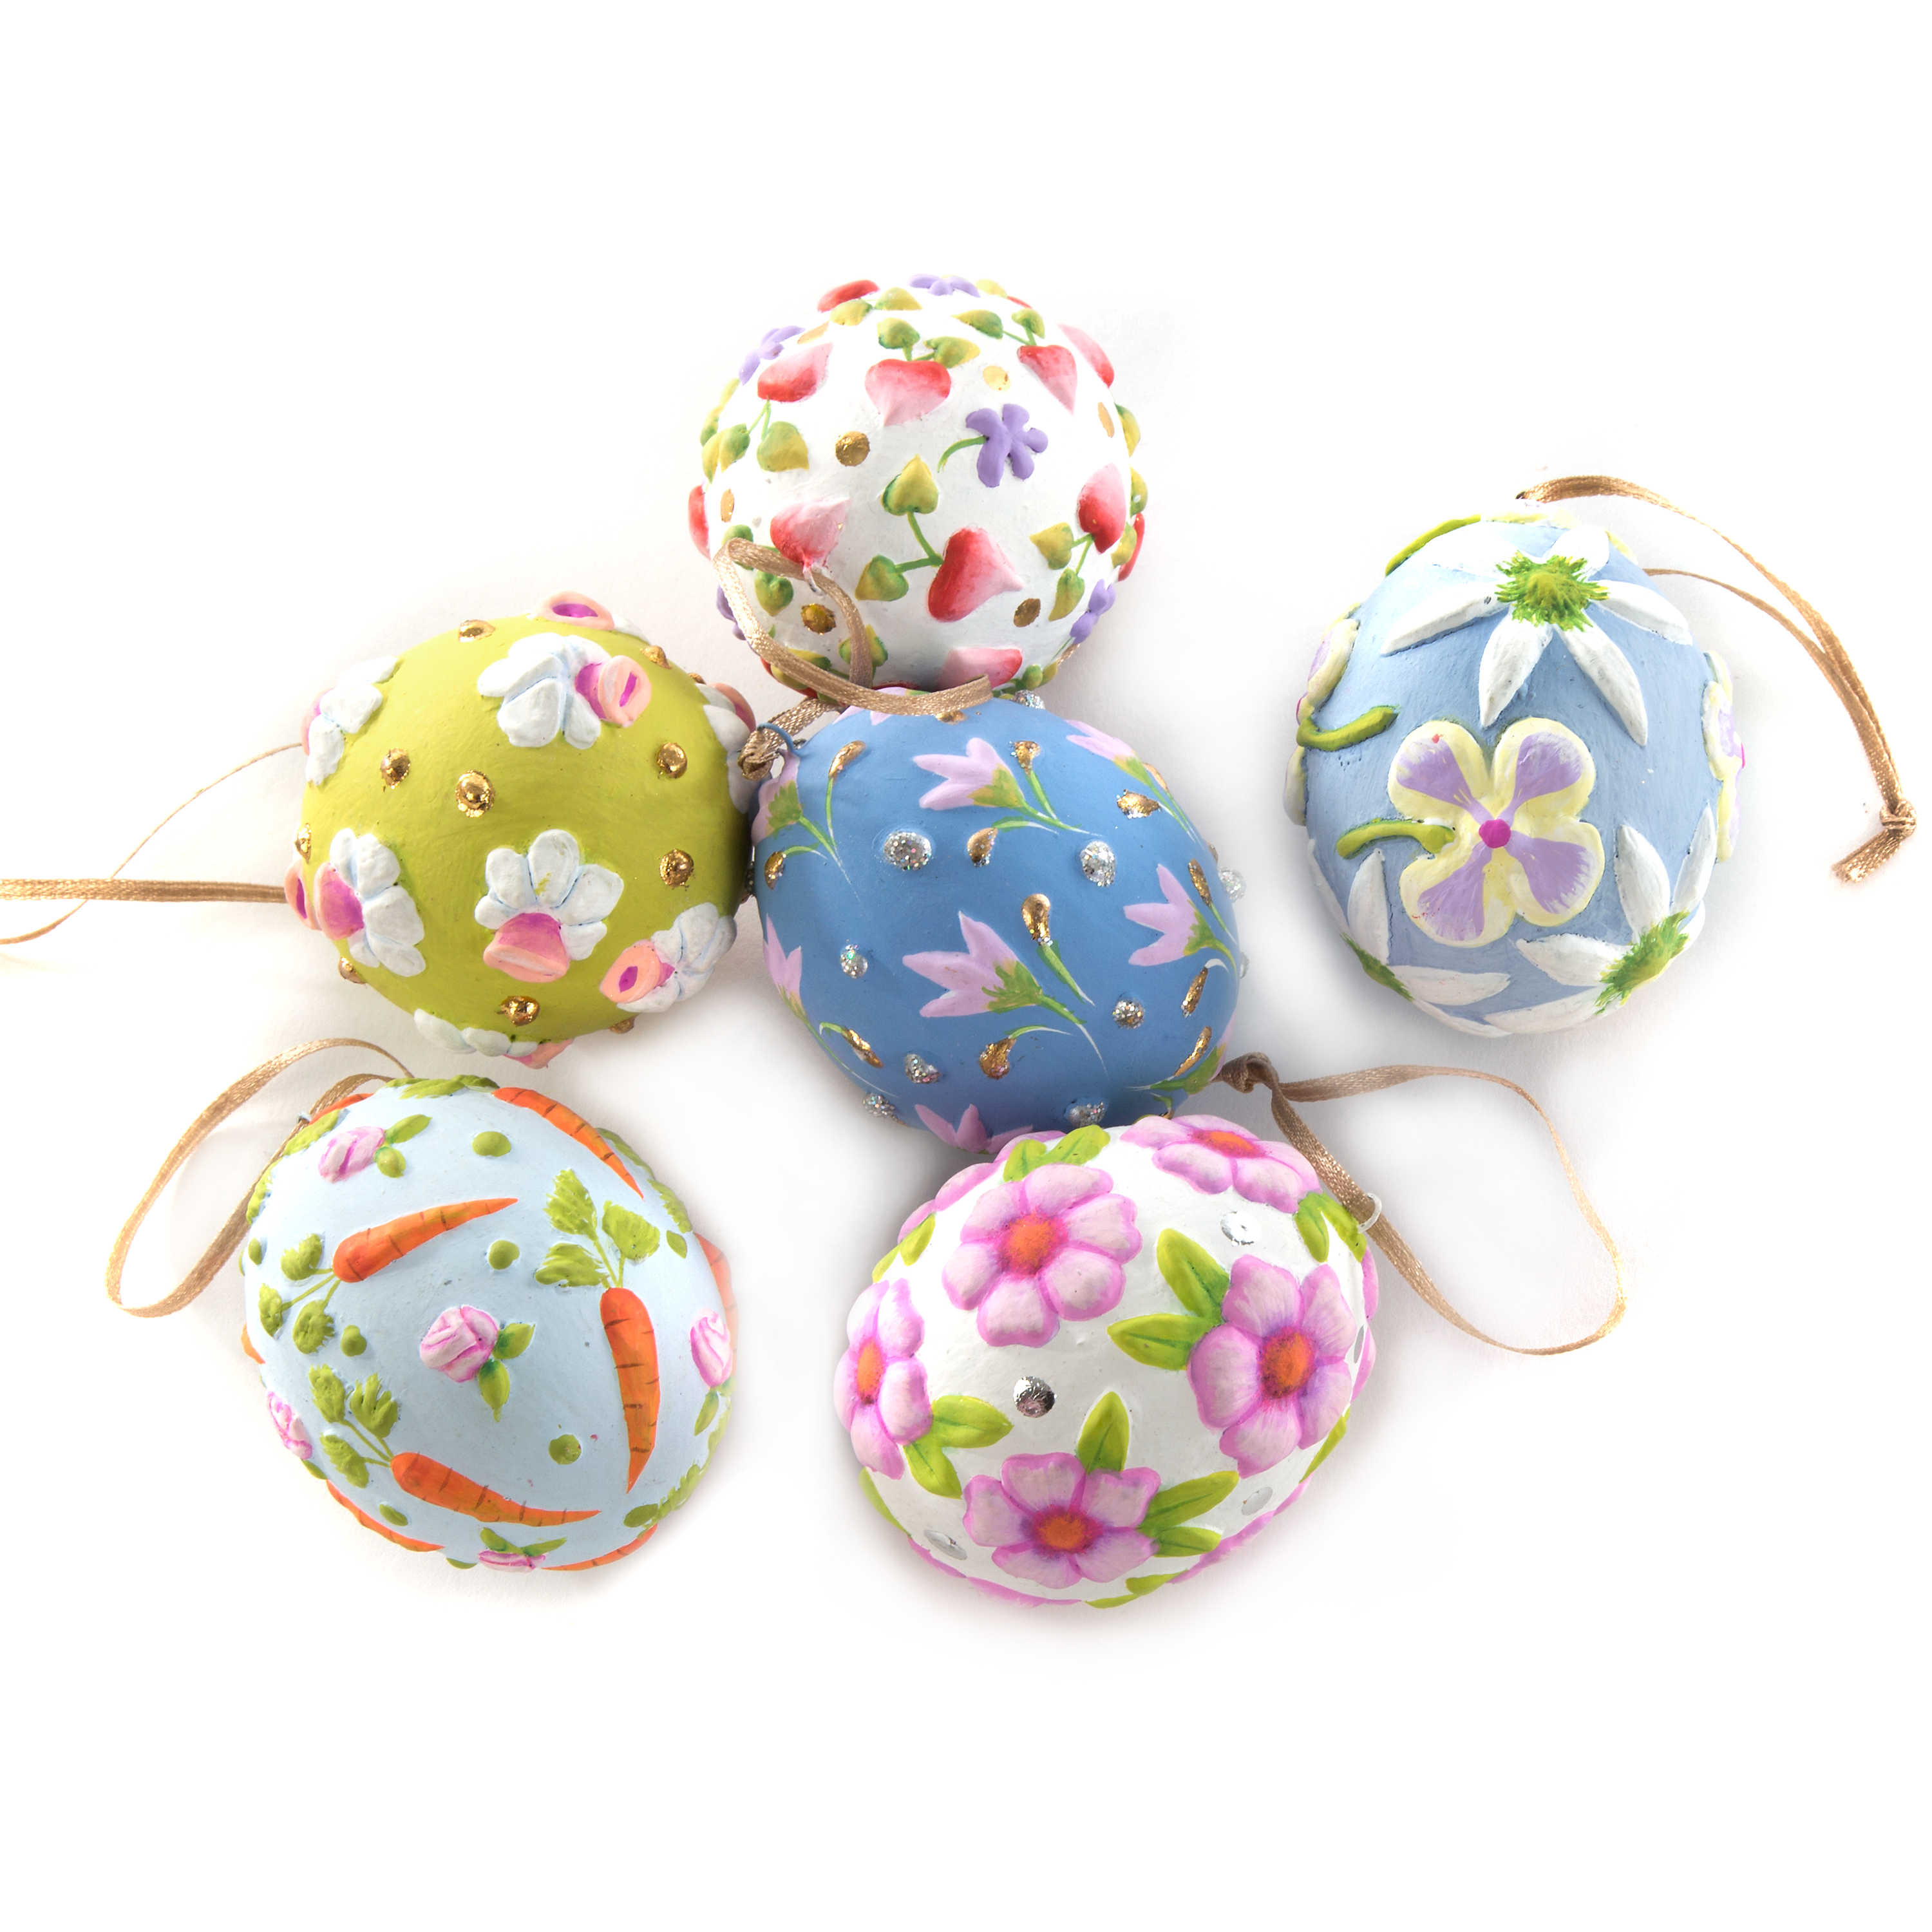 Patience Brewster Bright Floral Eggs, Set of 6 mackenzie-childs Panama 0